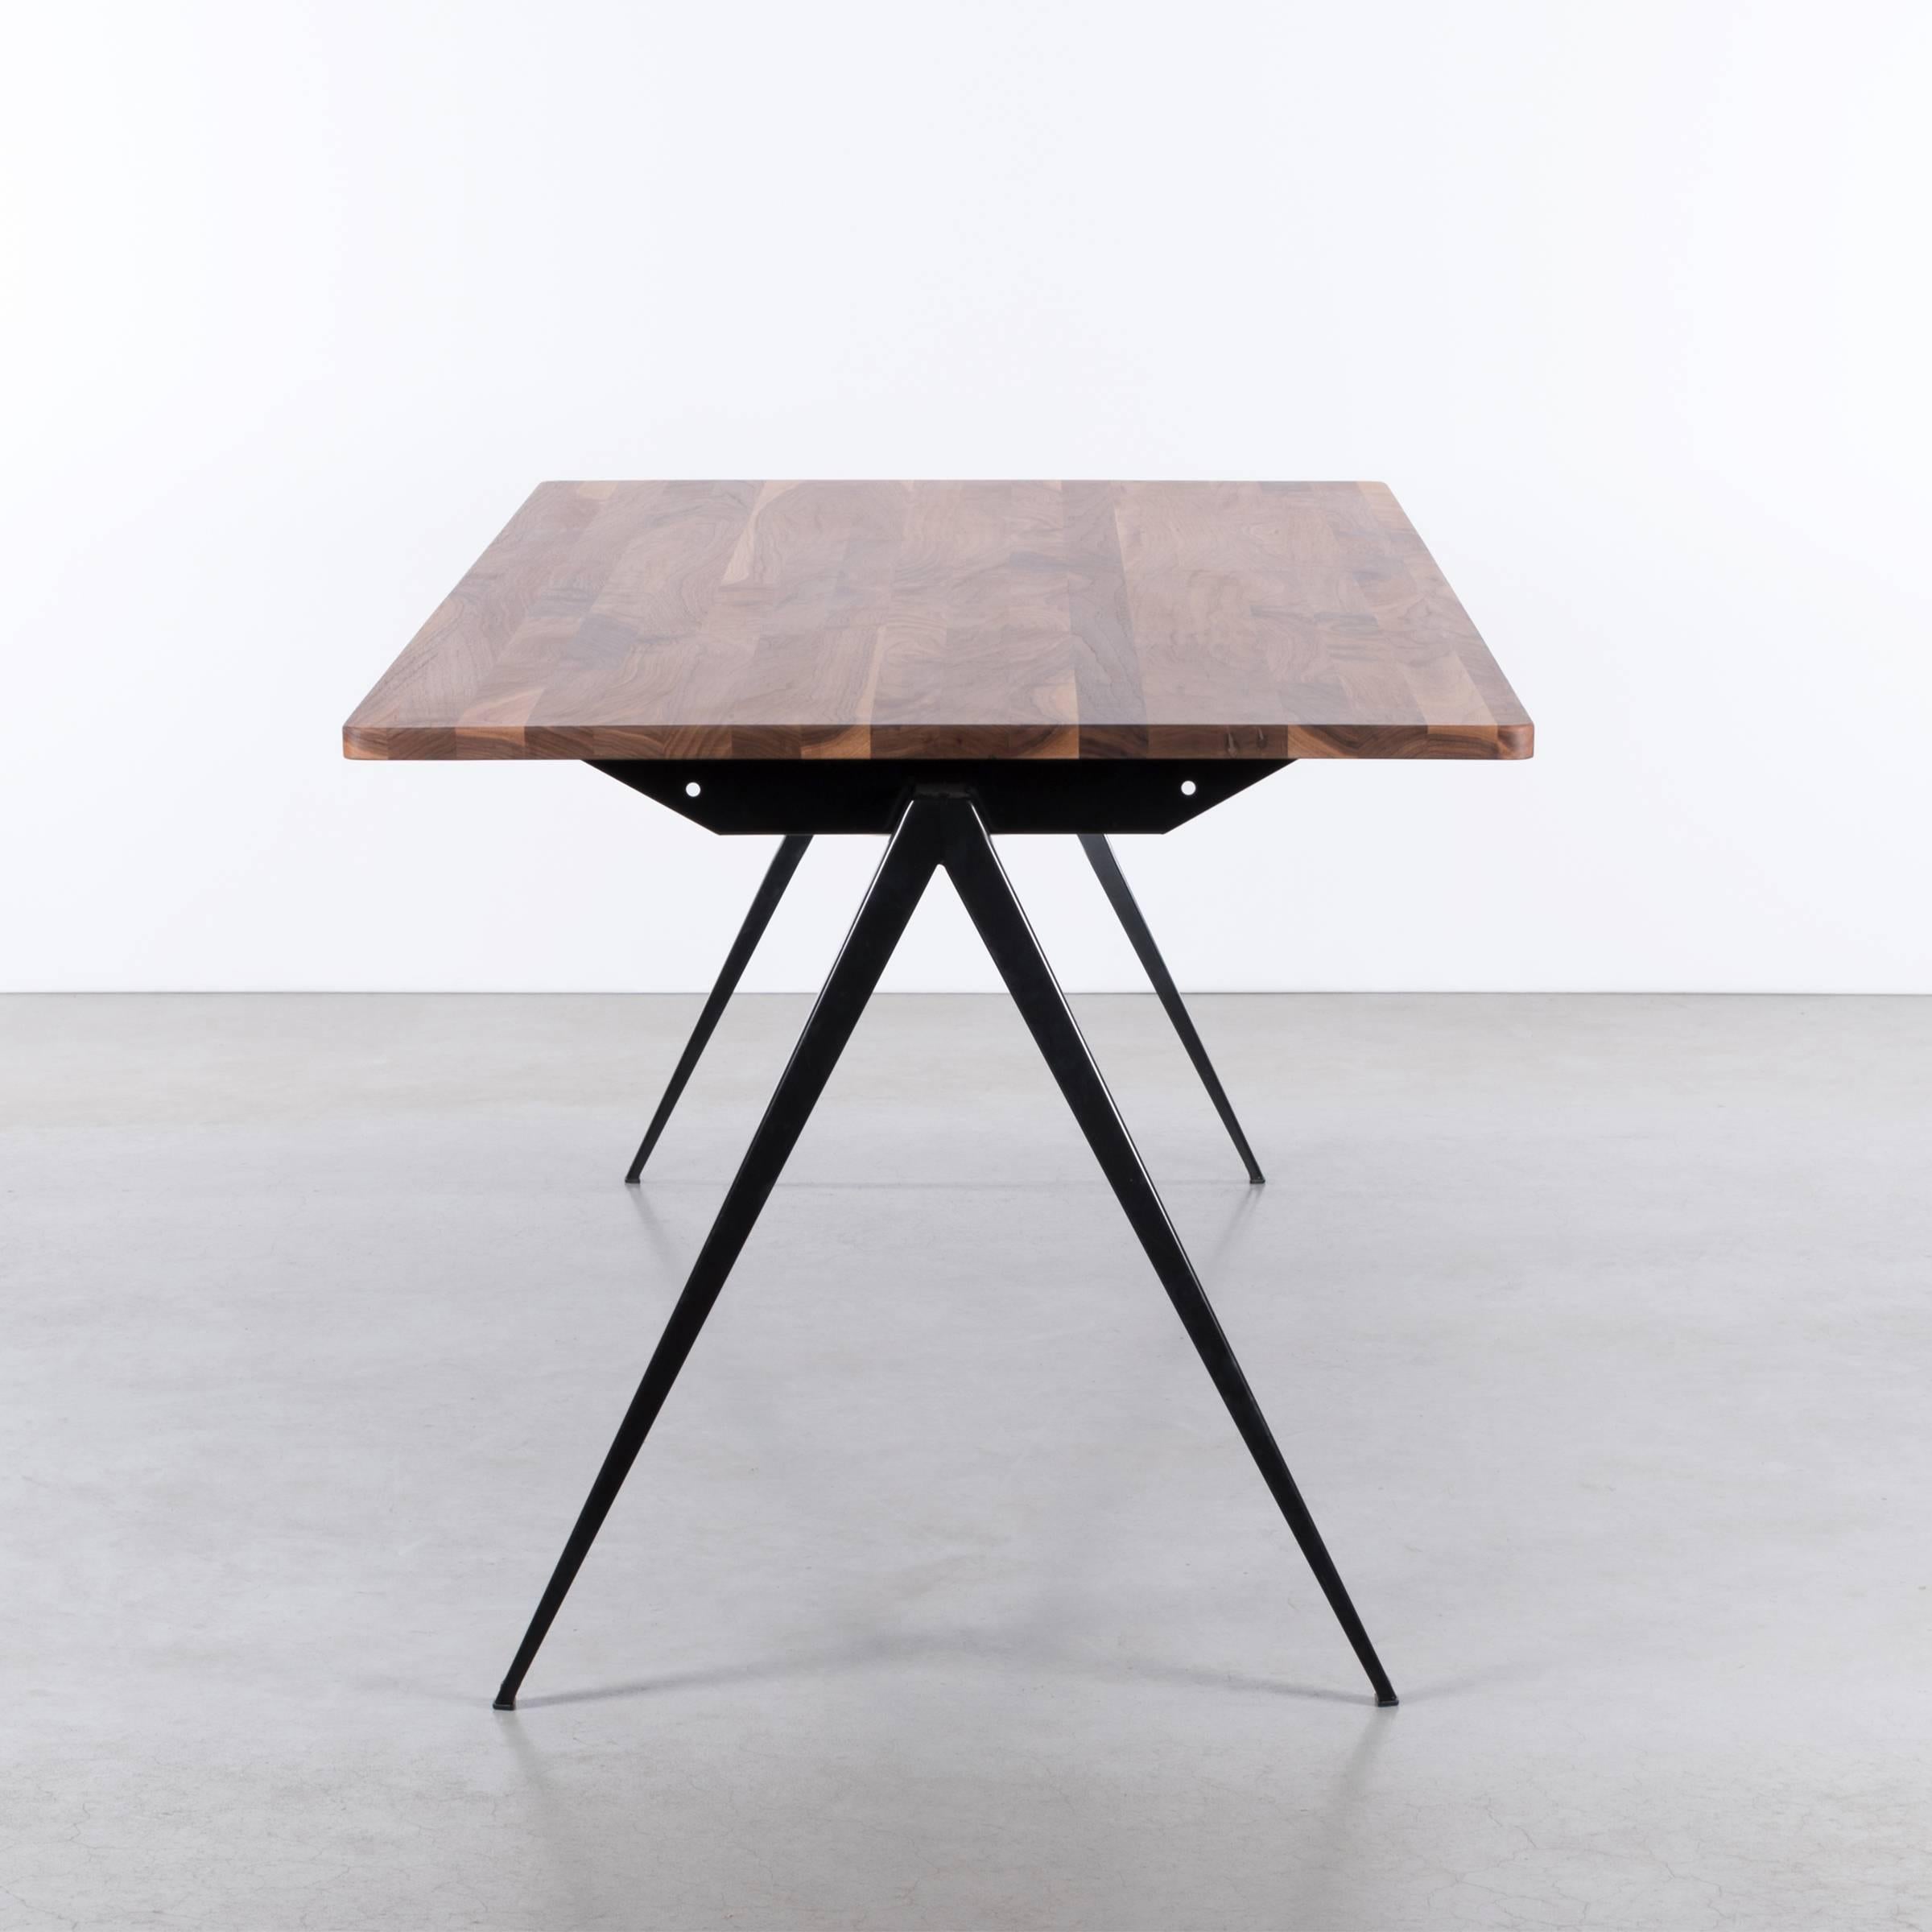 Great Industrial and beautiful dining table by Galvanitas. Black powder coated steel frame with compass legs and an oiled solid American walnut top. 
Bespoke options available if desired. The table can ship flat for more efficiency.